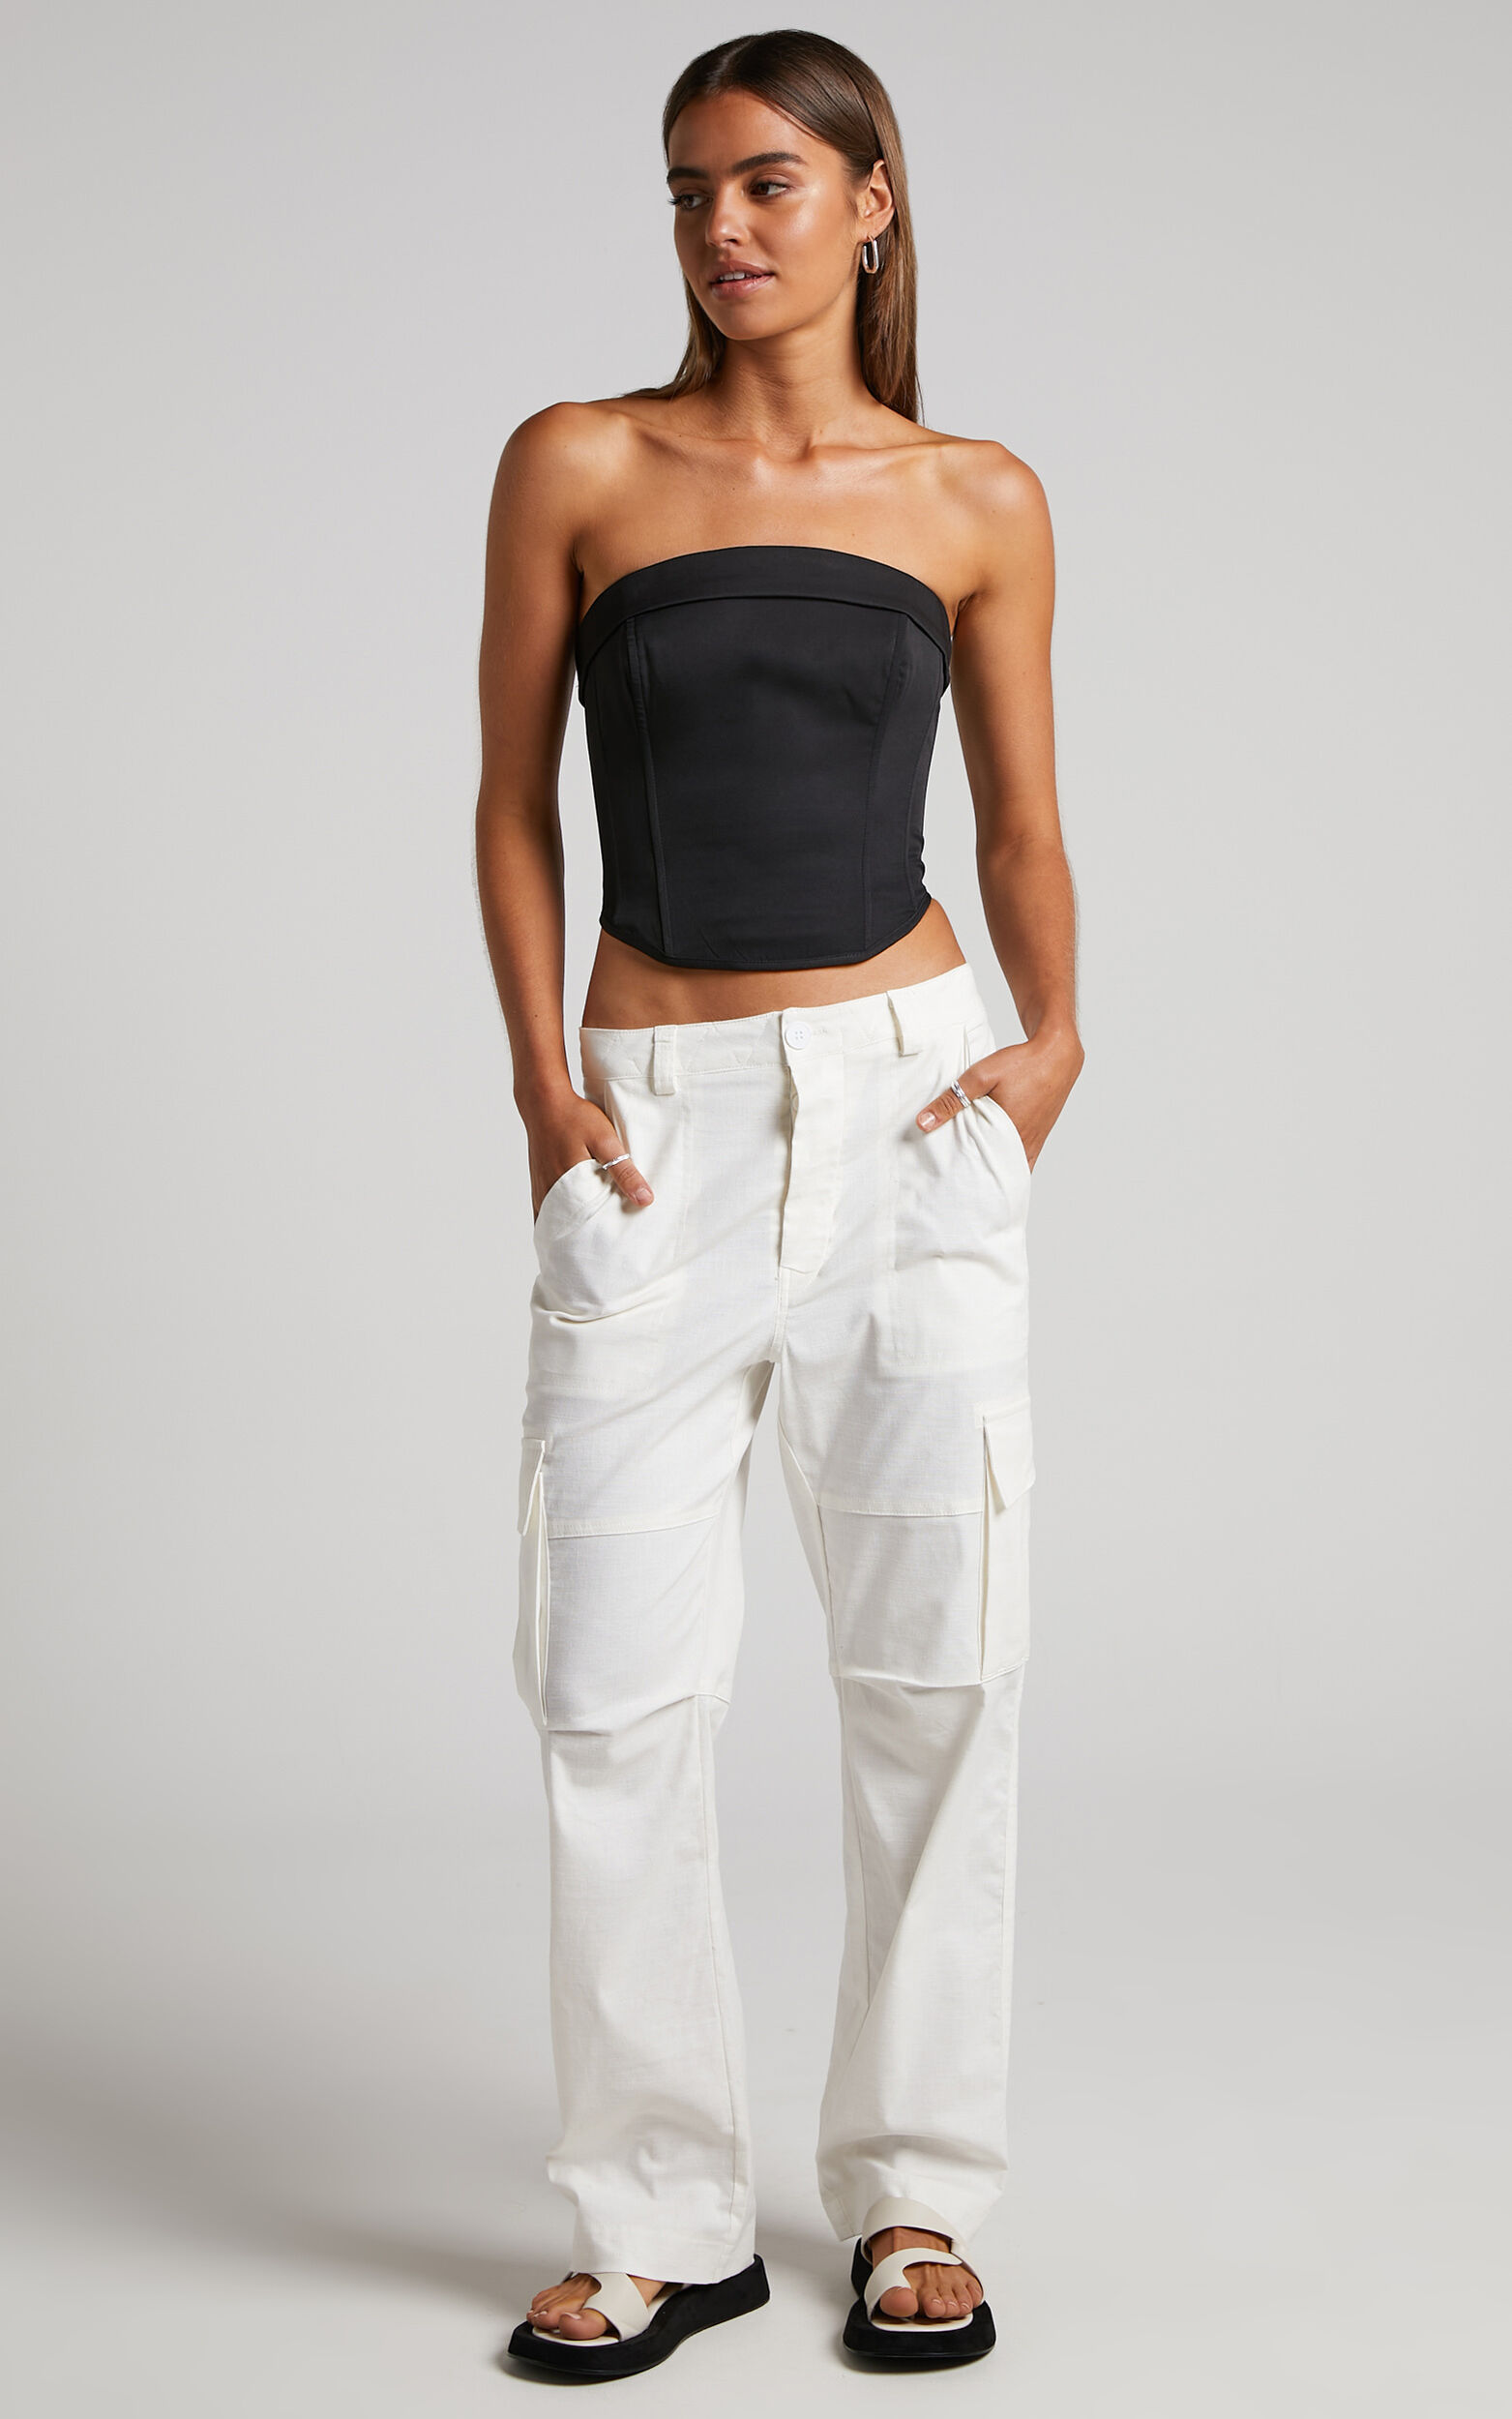 Reveey Pants - Low Rise Cargo Pants in White - 04, WHT1